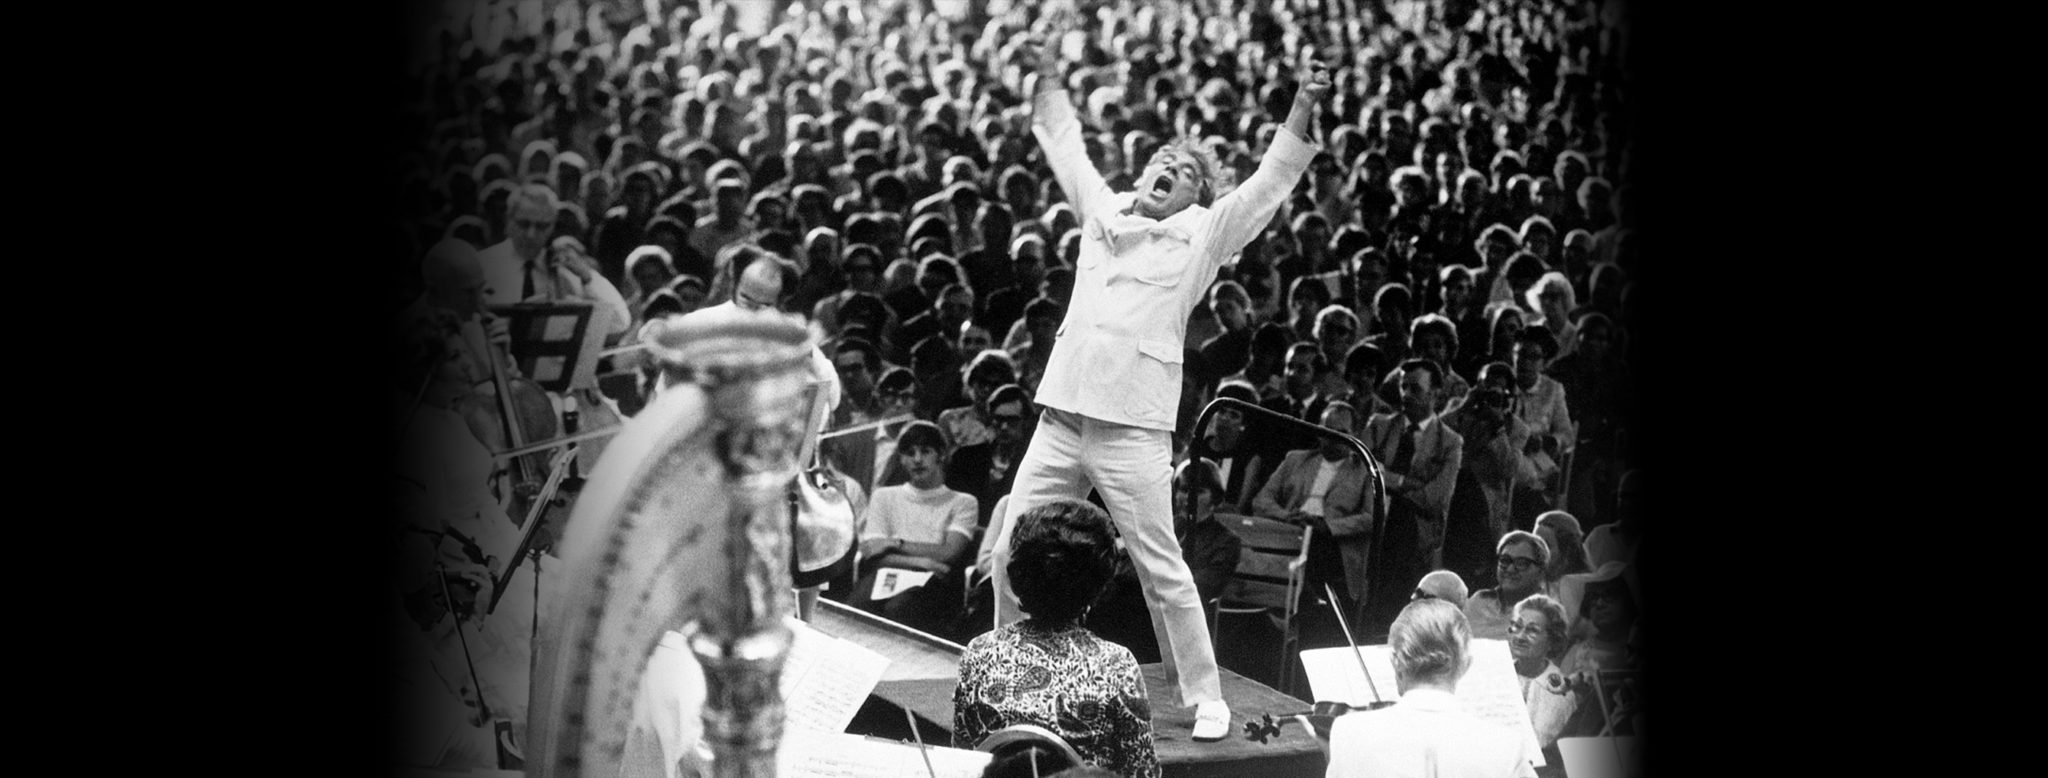 Conductor Leonard Bernstein at the climax of Mahler's Resurrection symphony performed by the Boston Symphony in Lenox, Massachusetts. July 8, 1970. (Credit: Bettmann / Getty Images)